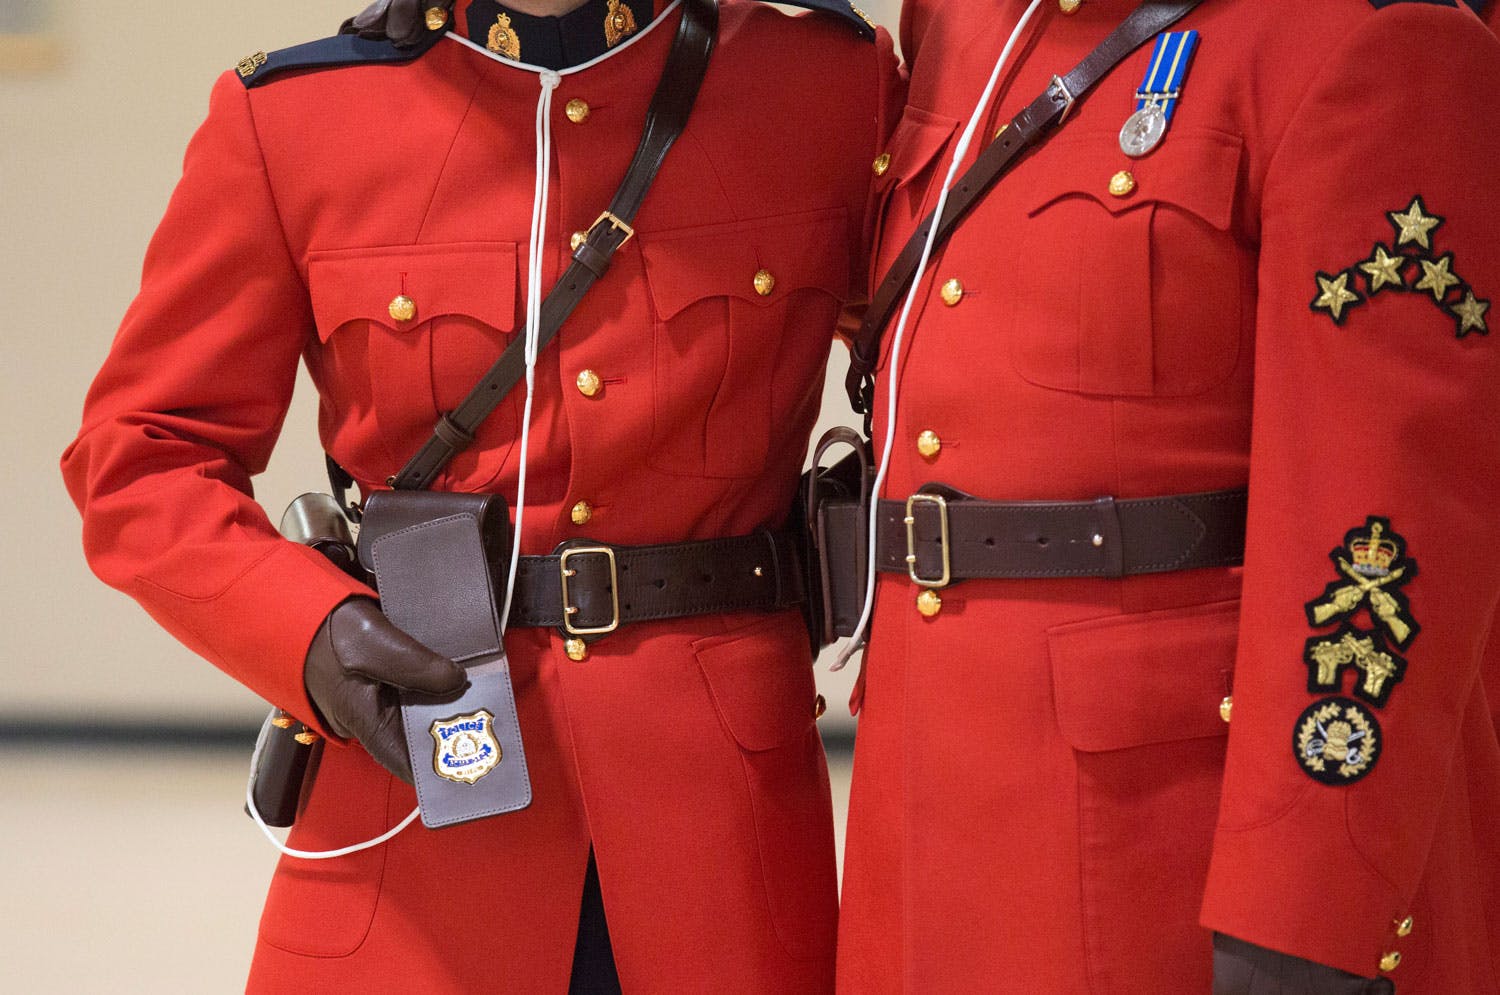 Upper body view of two men wearing red serge RCMP uniform.